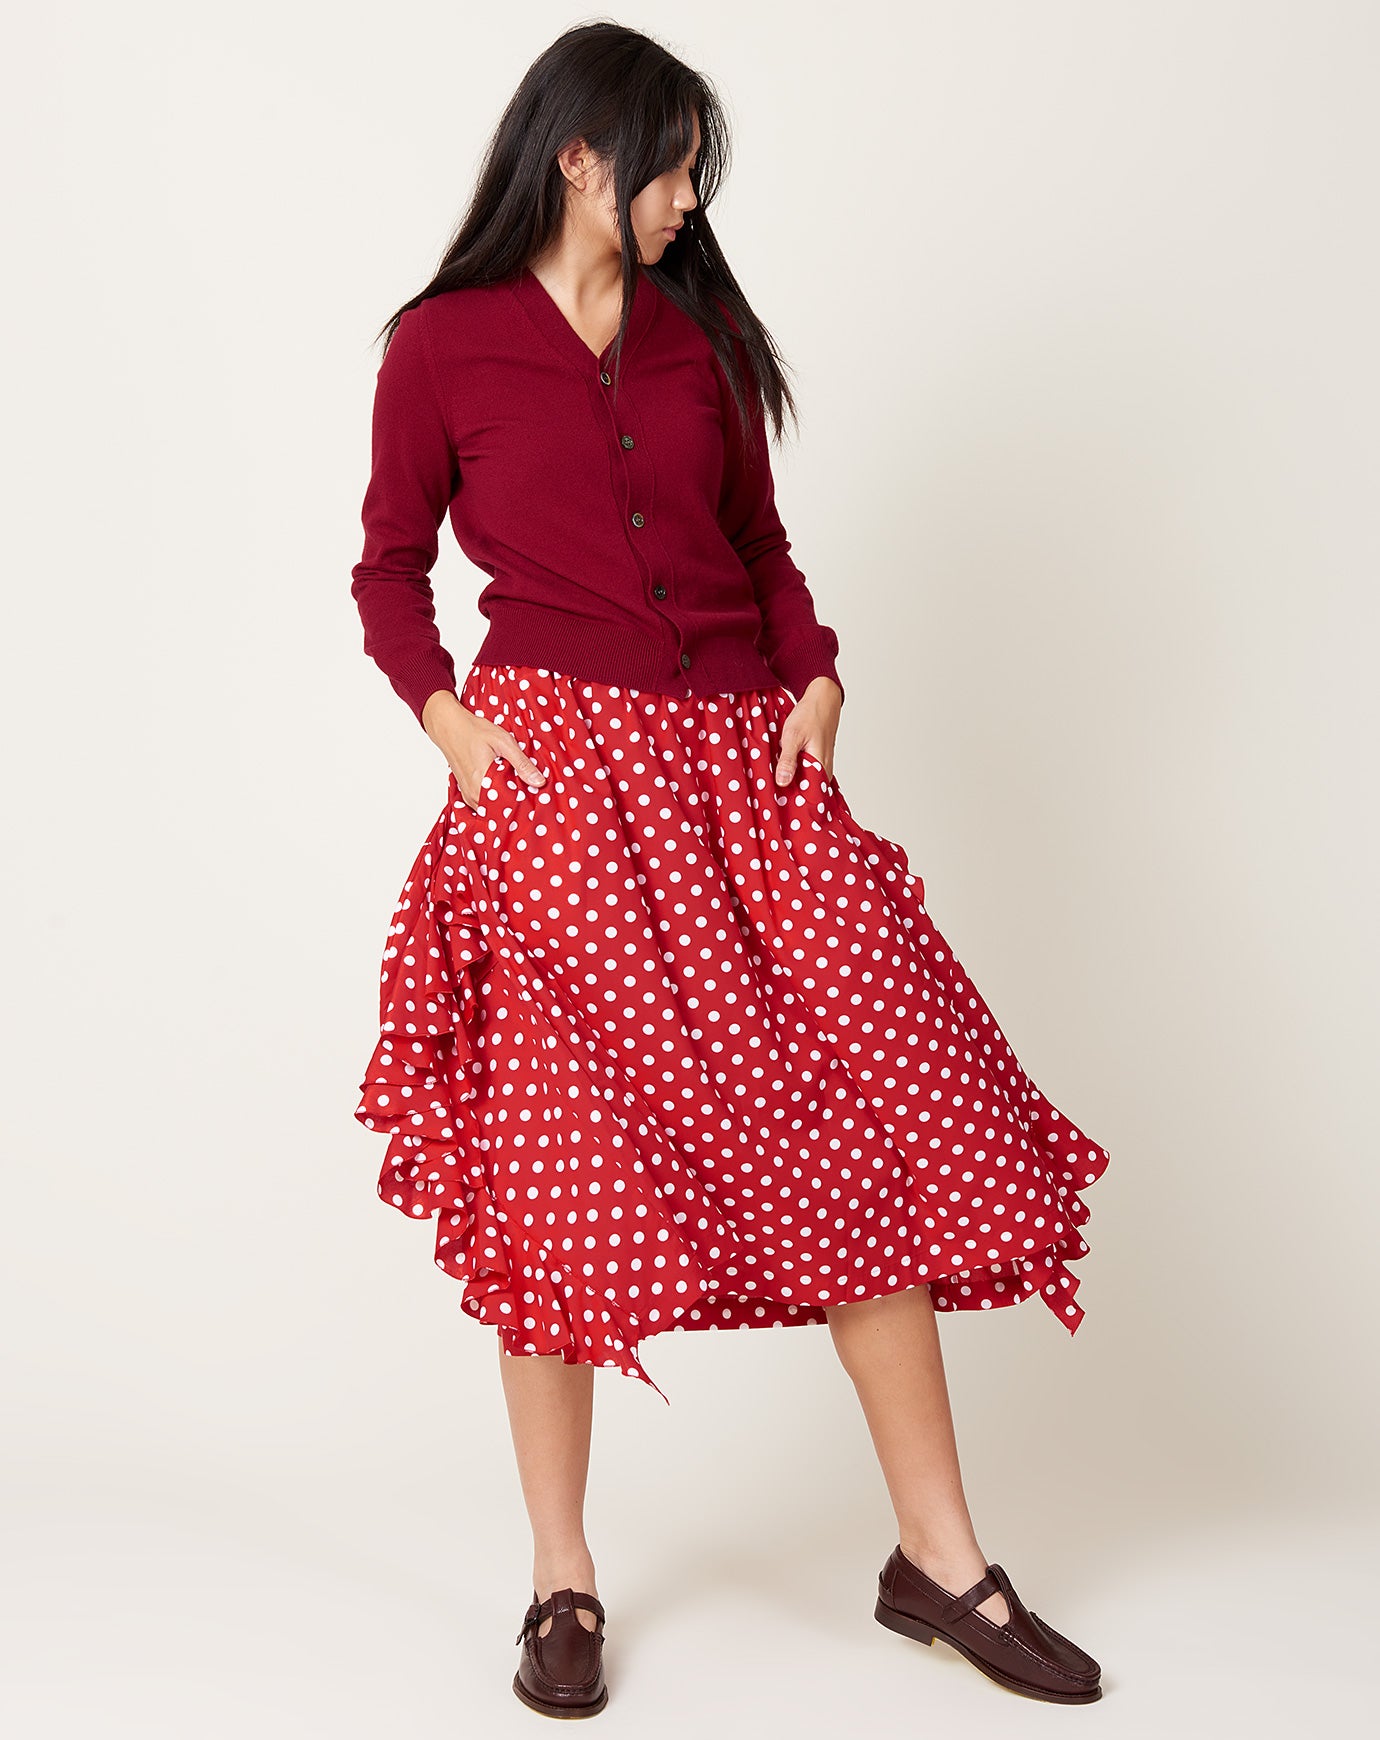 Discover 233+ polka dot skirt outfit